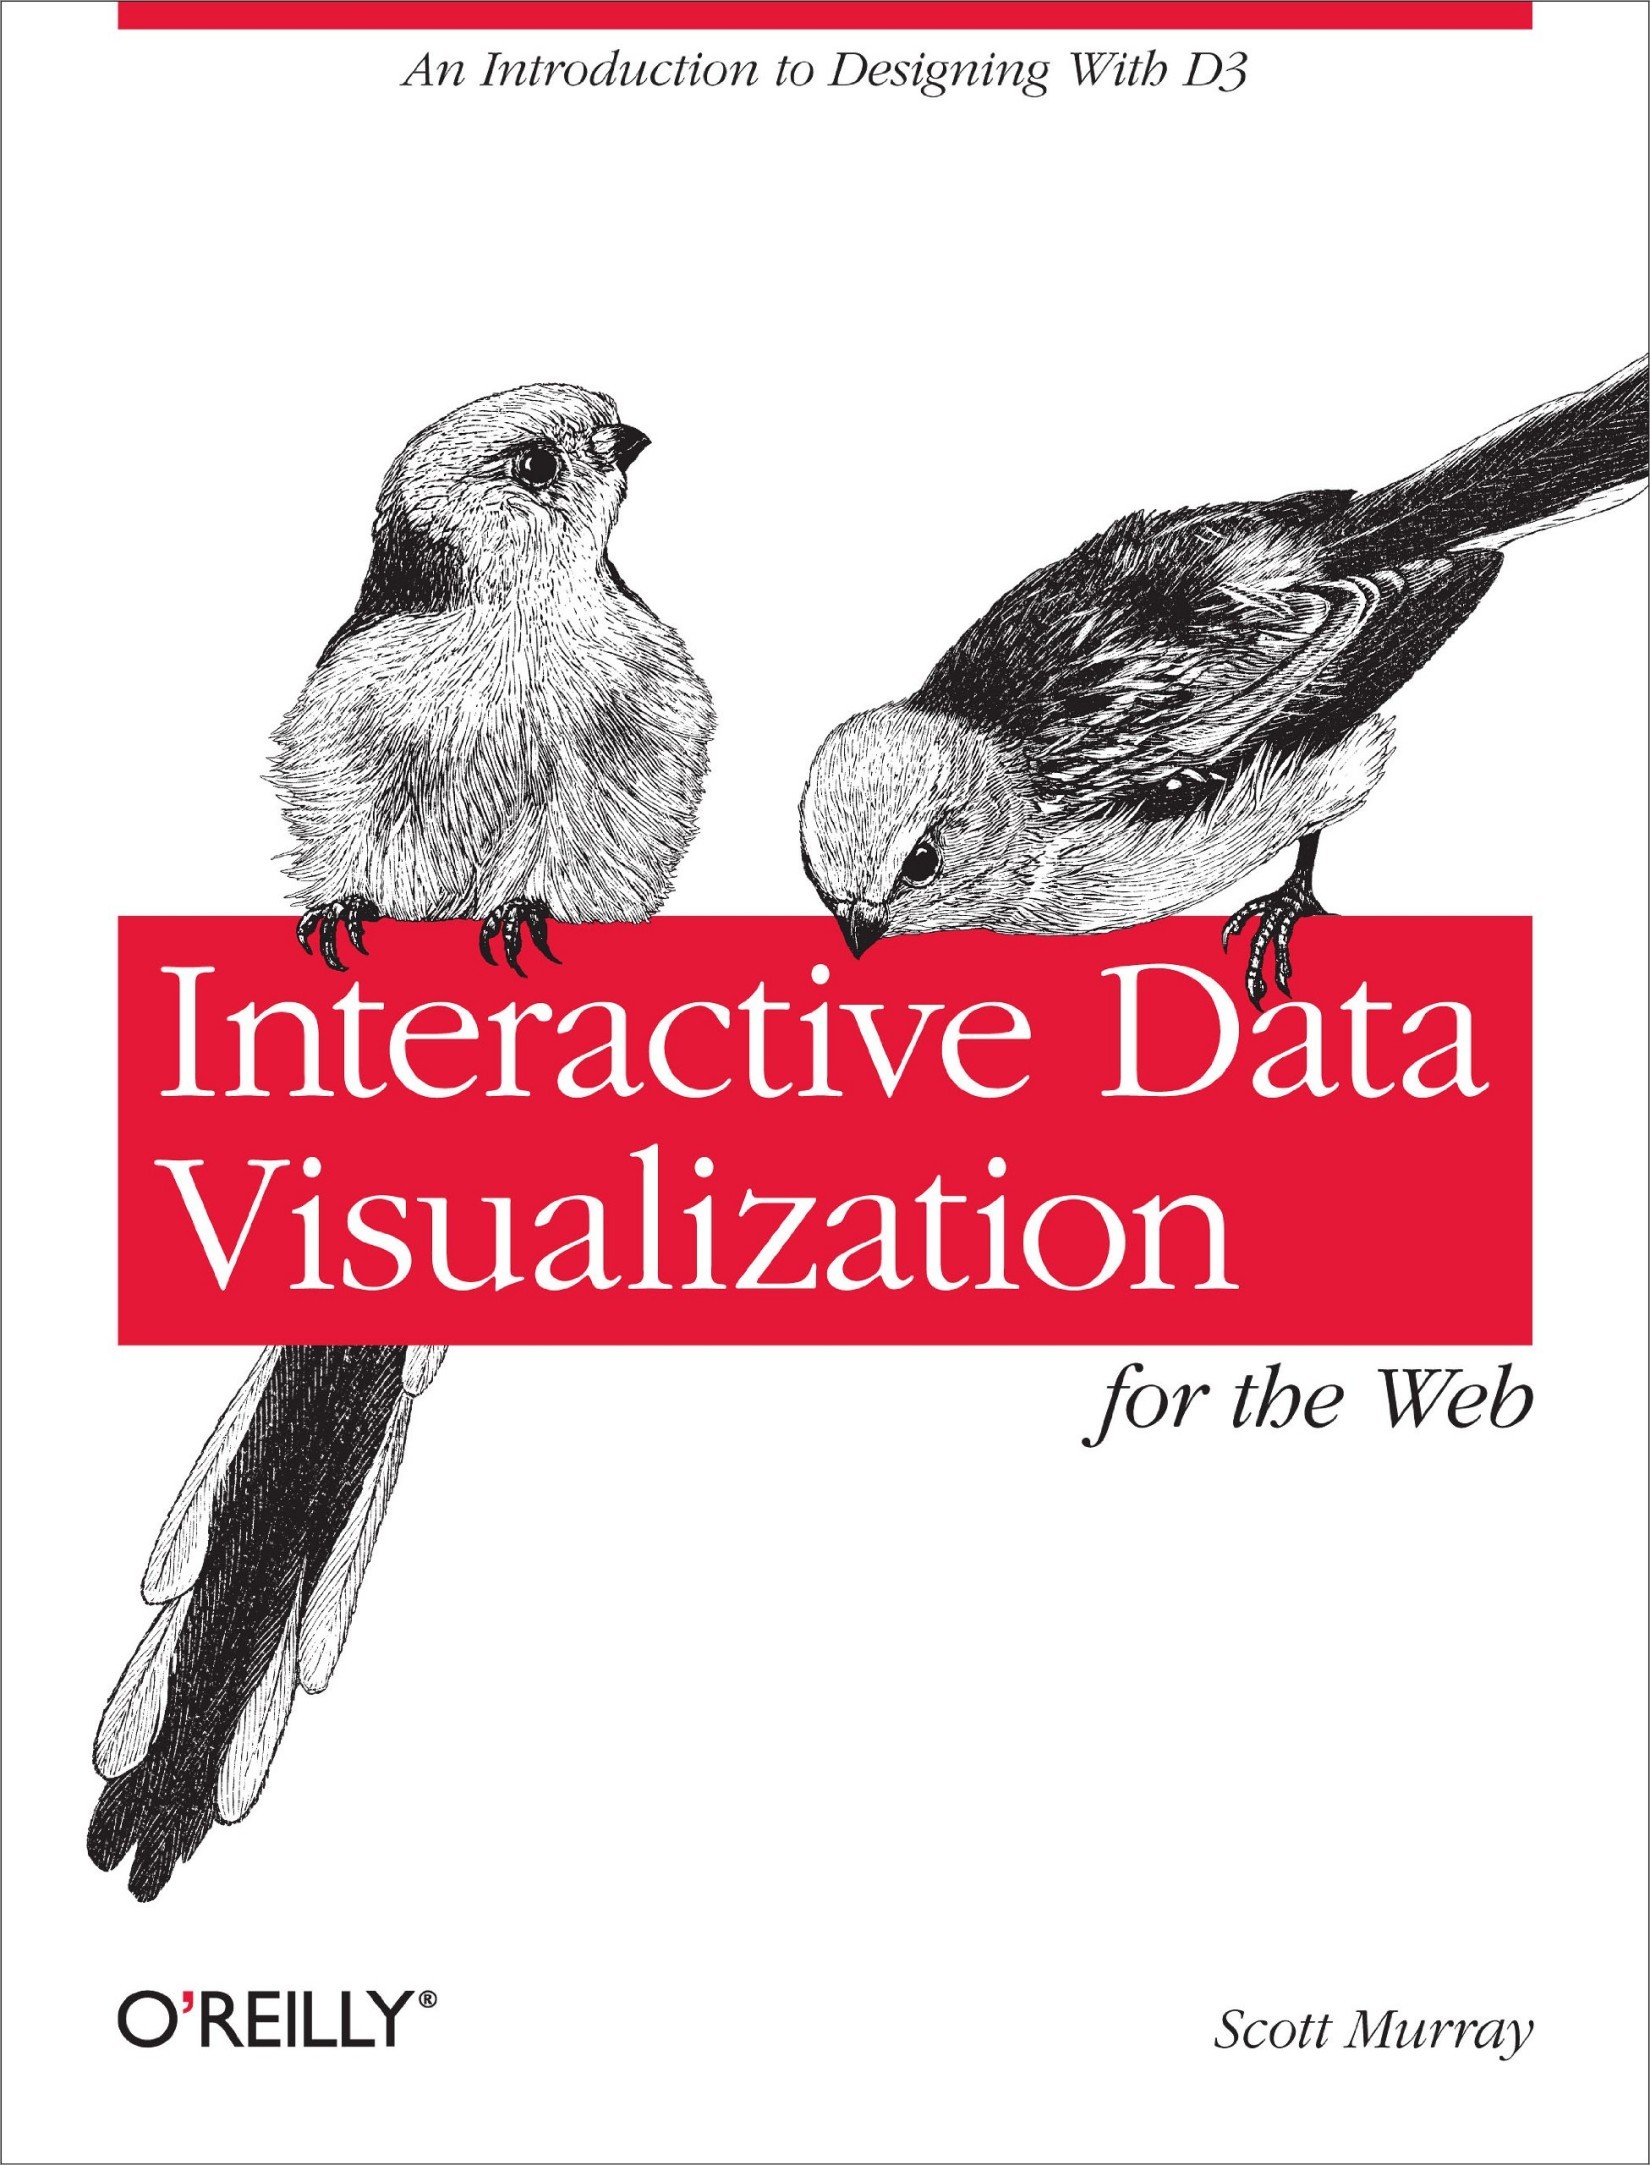 Interactive Data Visualization for the Web: An Introduction to Designing with